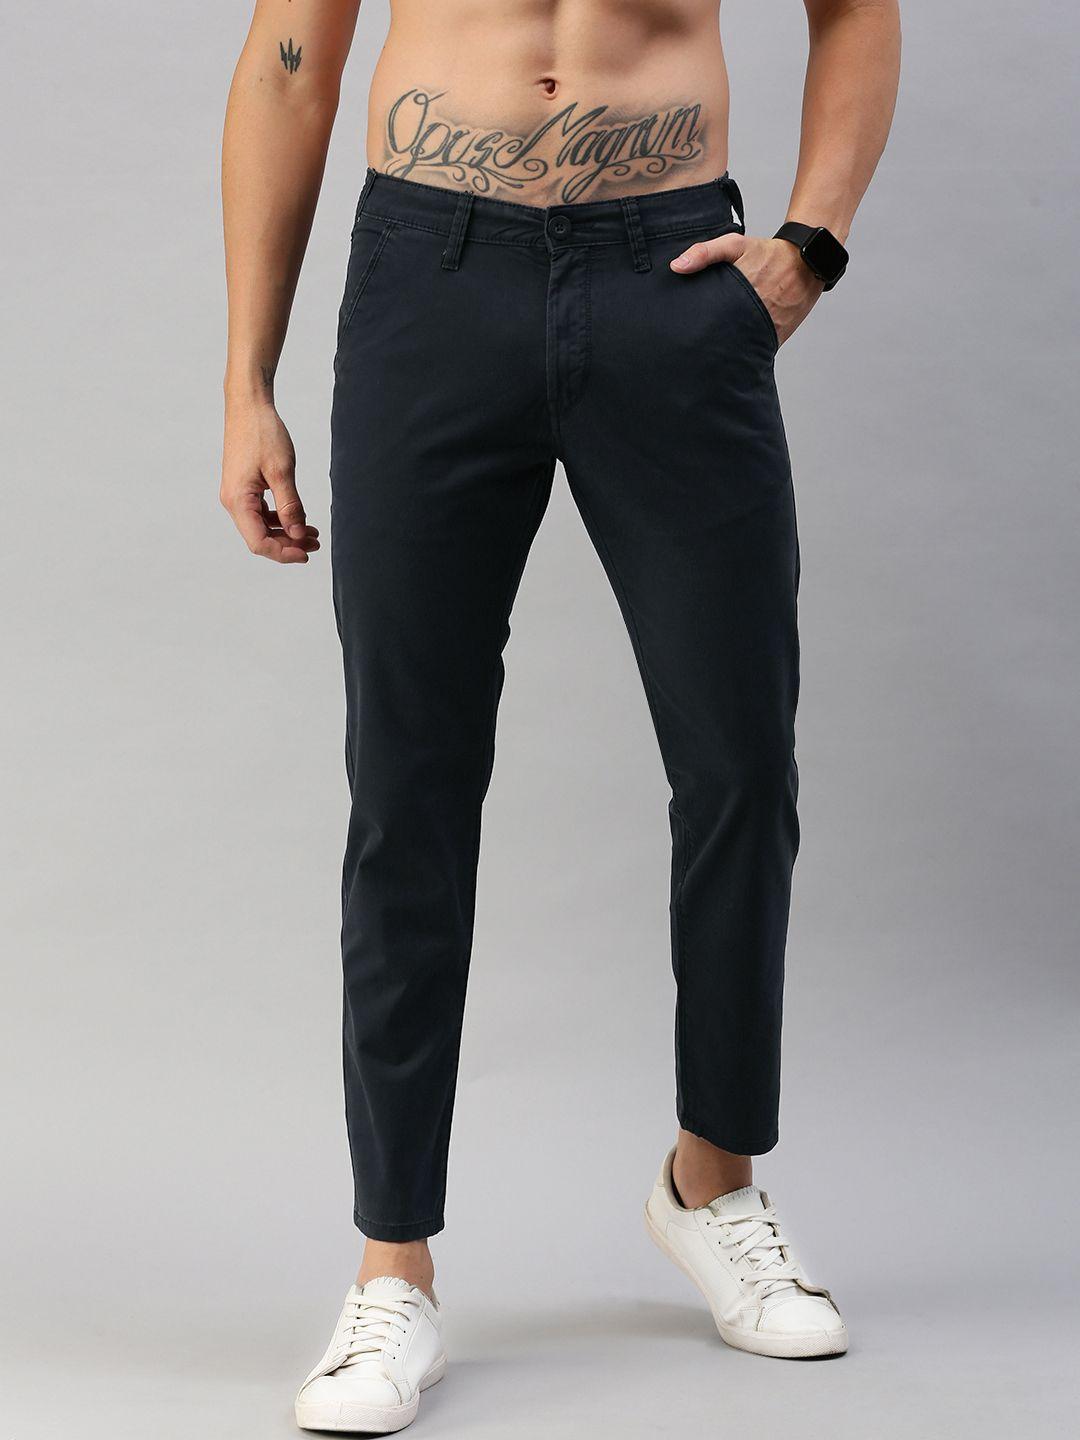 here&now-men-navy-blue-trousers